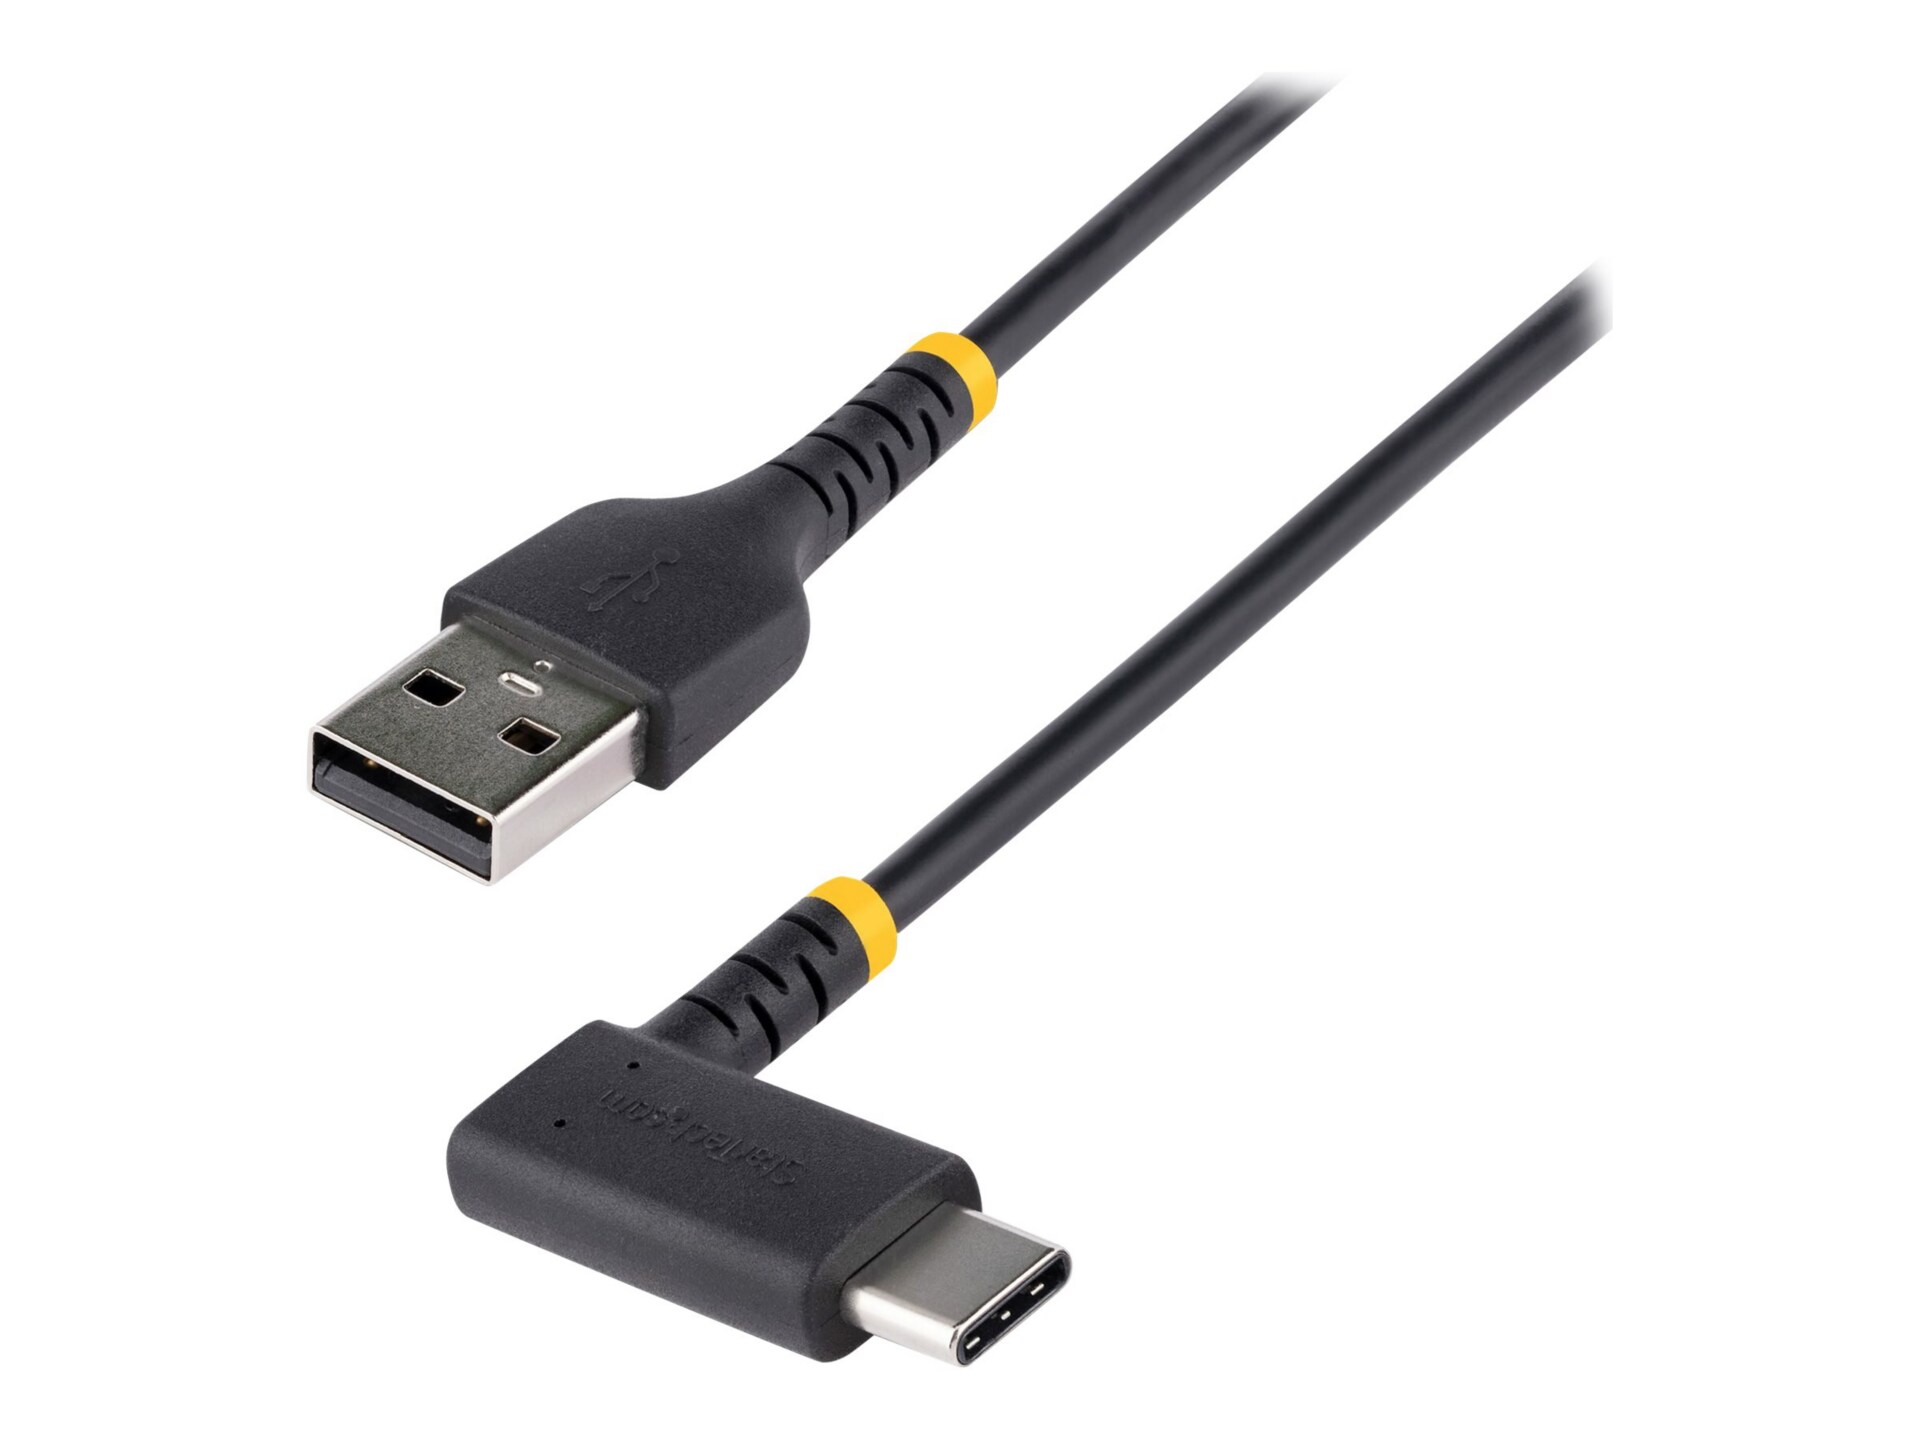 StarTech.com 6tf (2m) USB A to C Charging Cable Right Angle, Heavy Duty Fast Charge USB-C Cable, Durable and Rugged